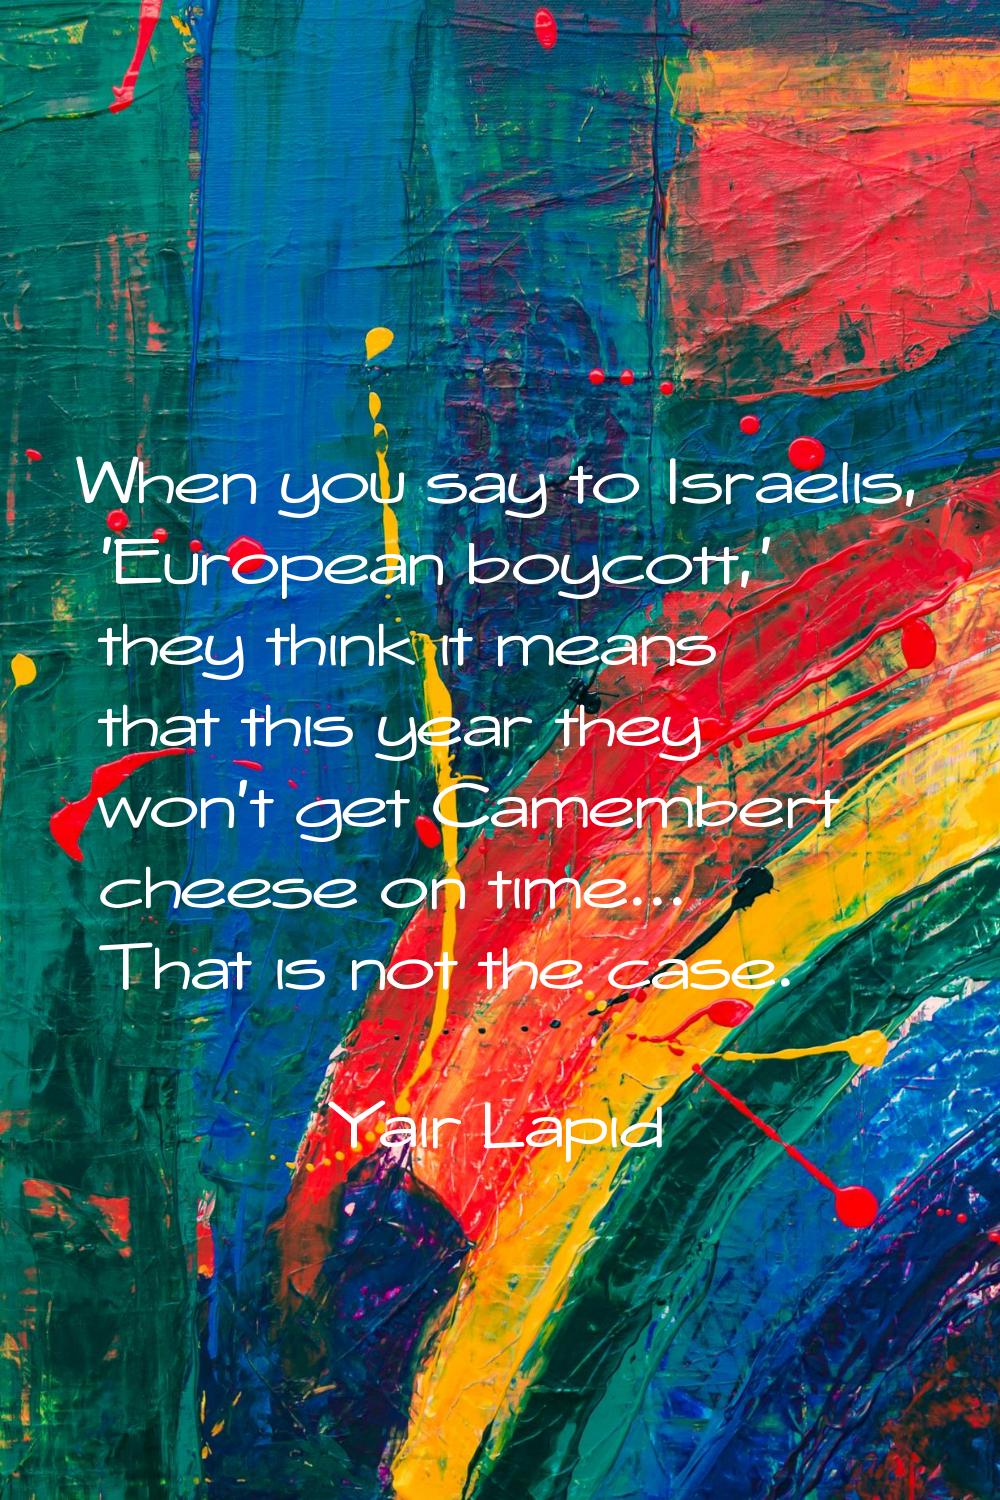 When you say to Israelis, 'European boycott,' they think it means that this year they won't get Cam